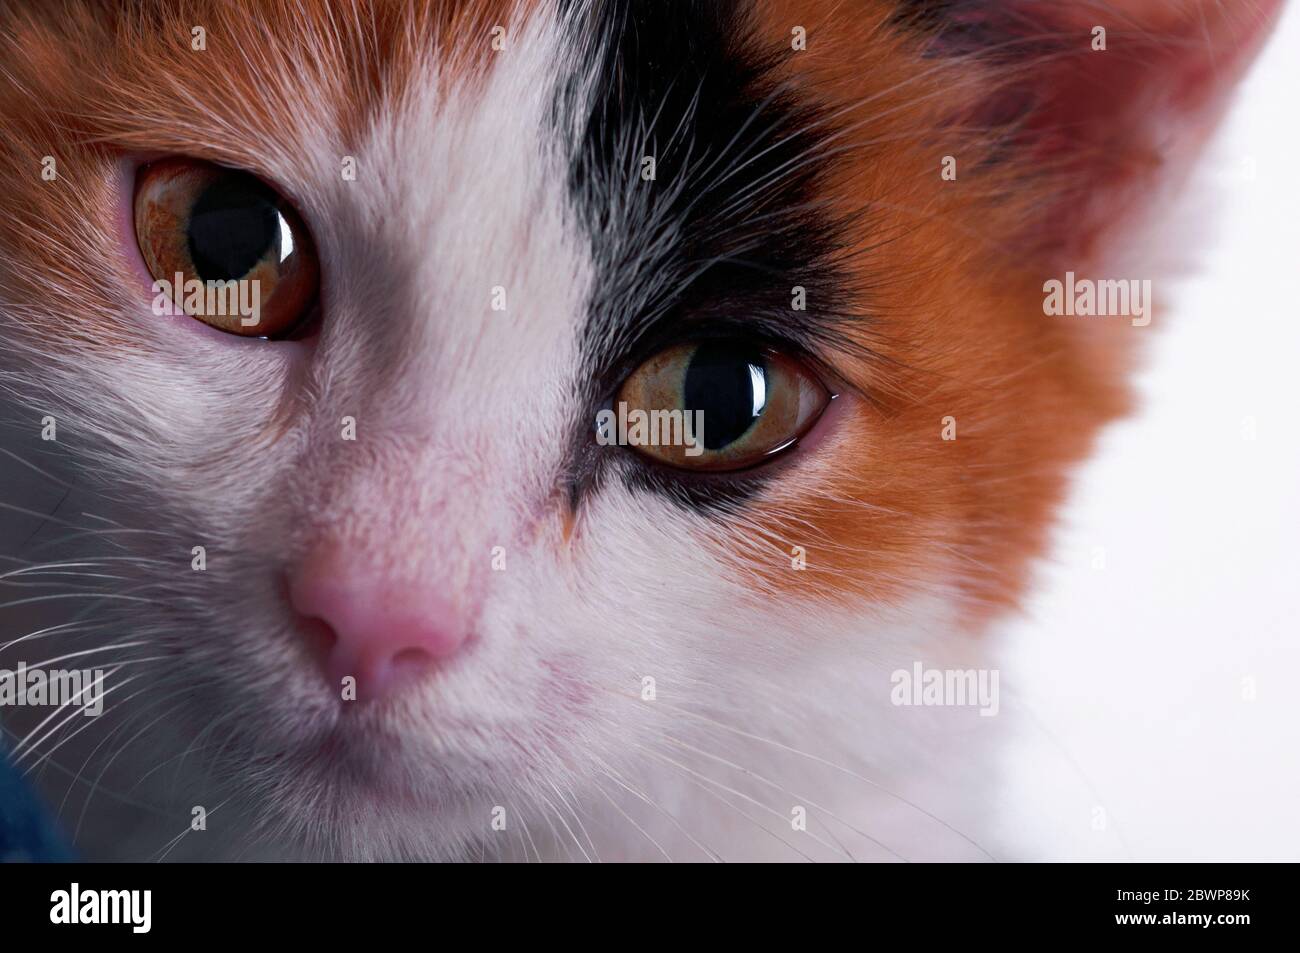 Cute kitten, a good friend of man. Kitten with multi-colored hair Stock Photo